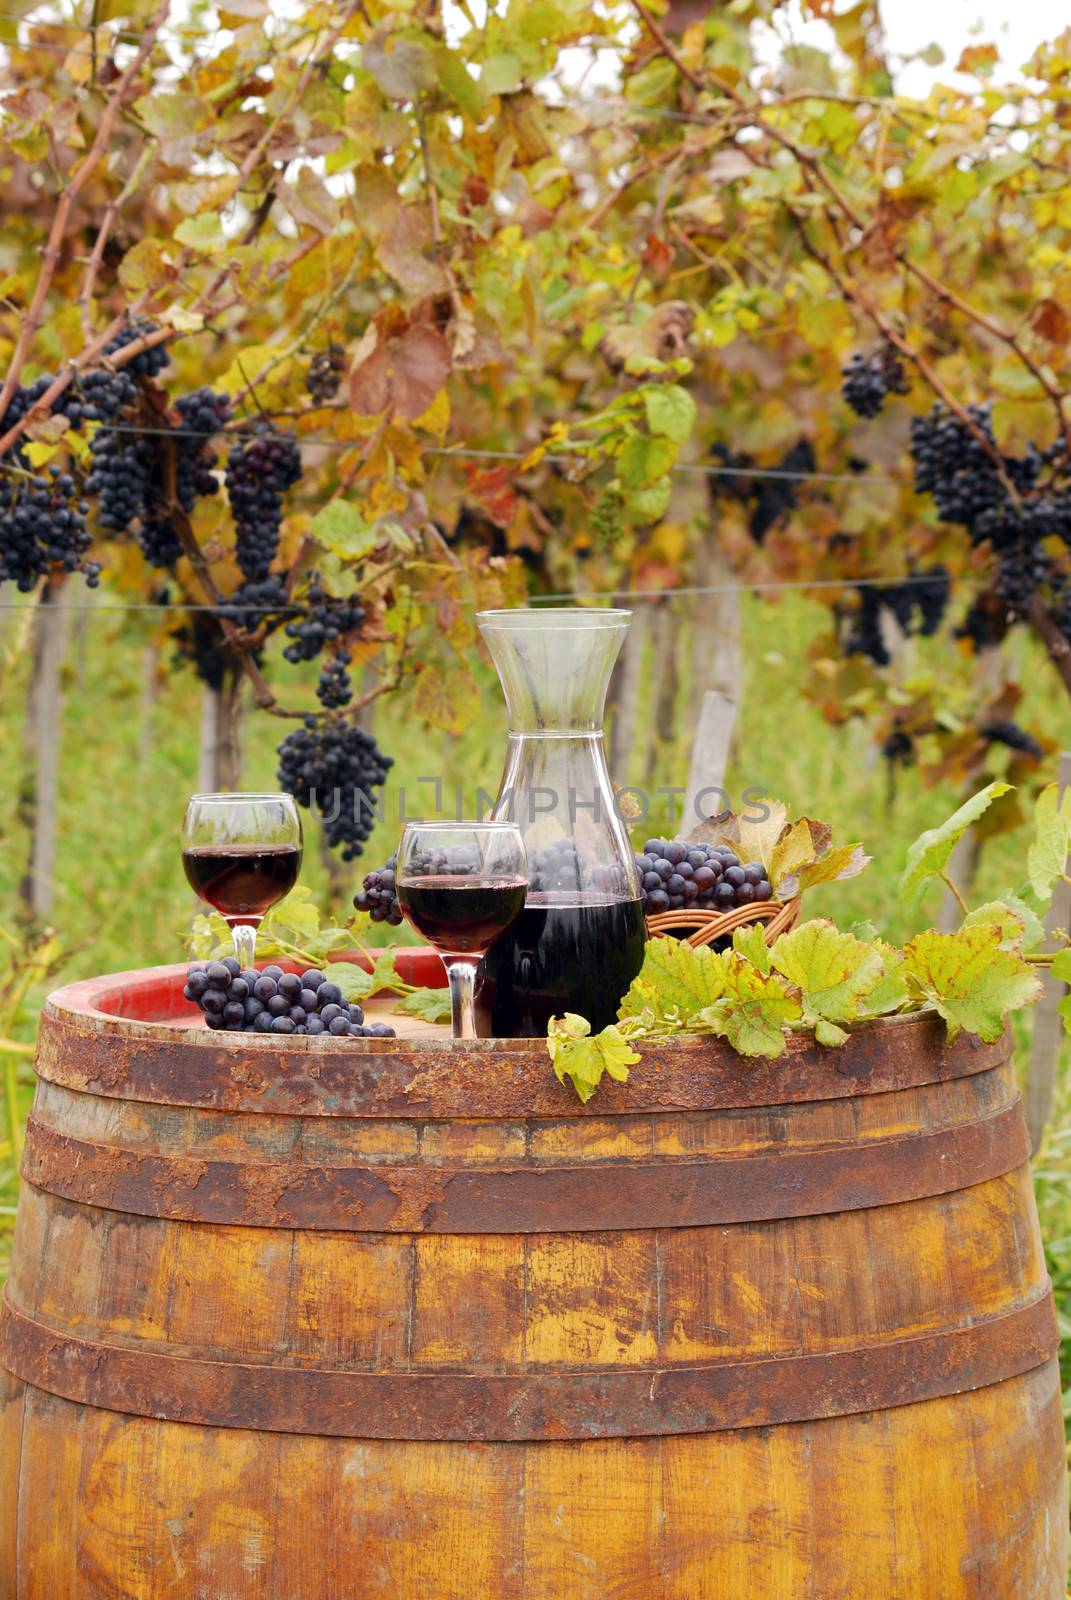 red wine on old wooden barrel by goce